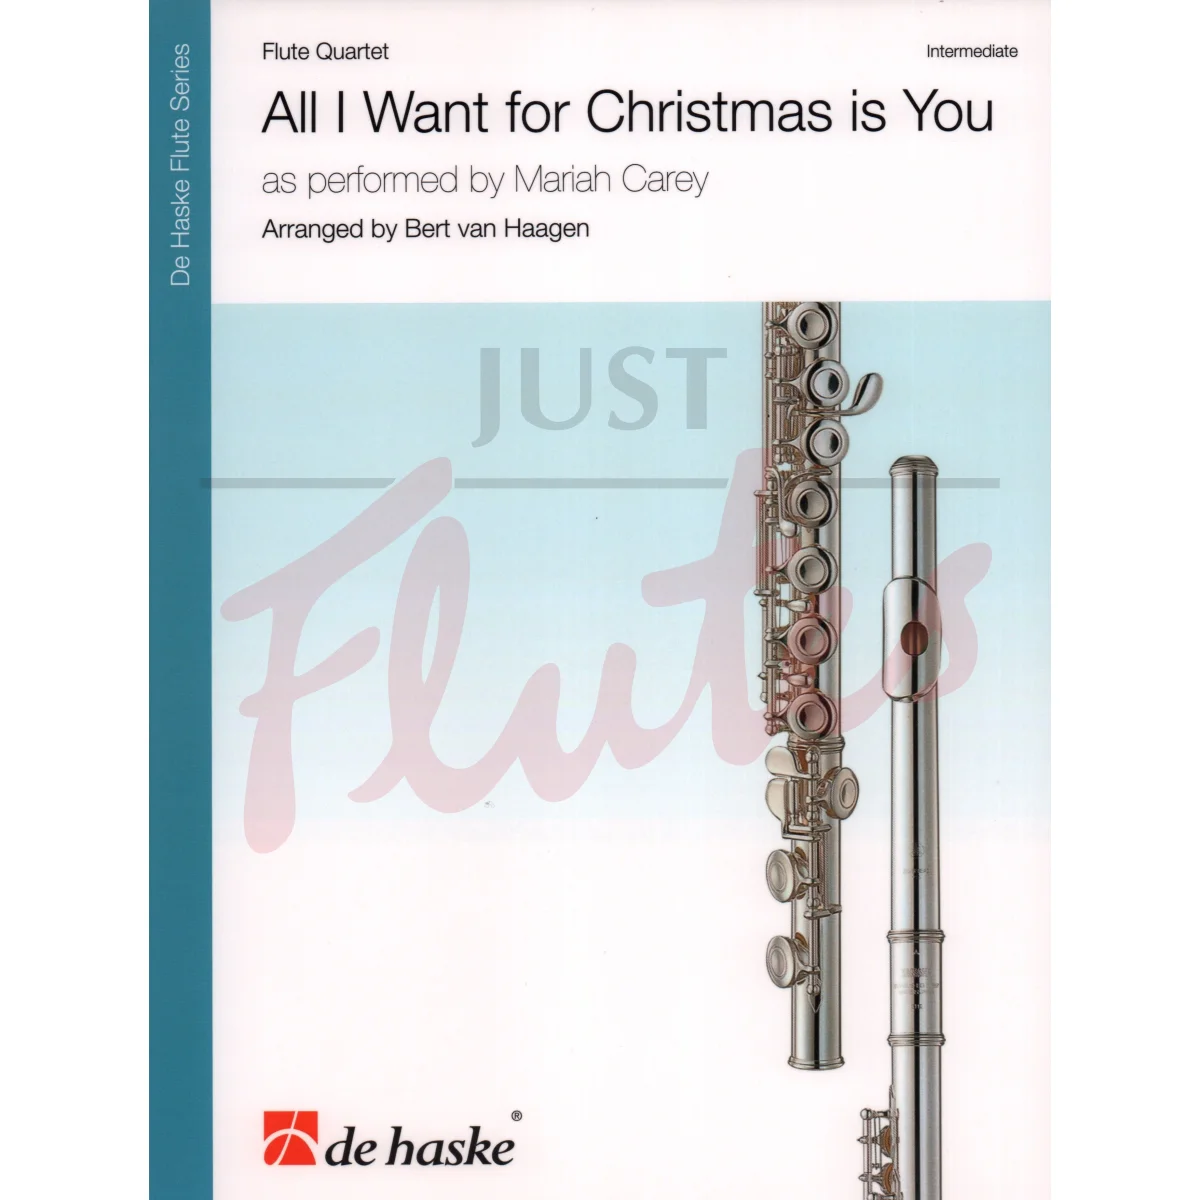 All I Want for Christmas is You for Flute Quartet